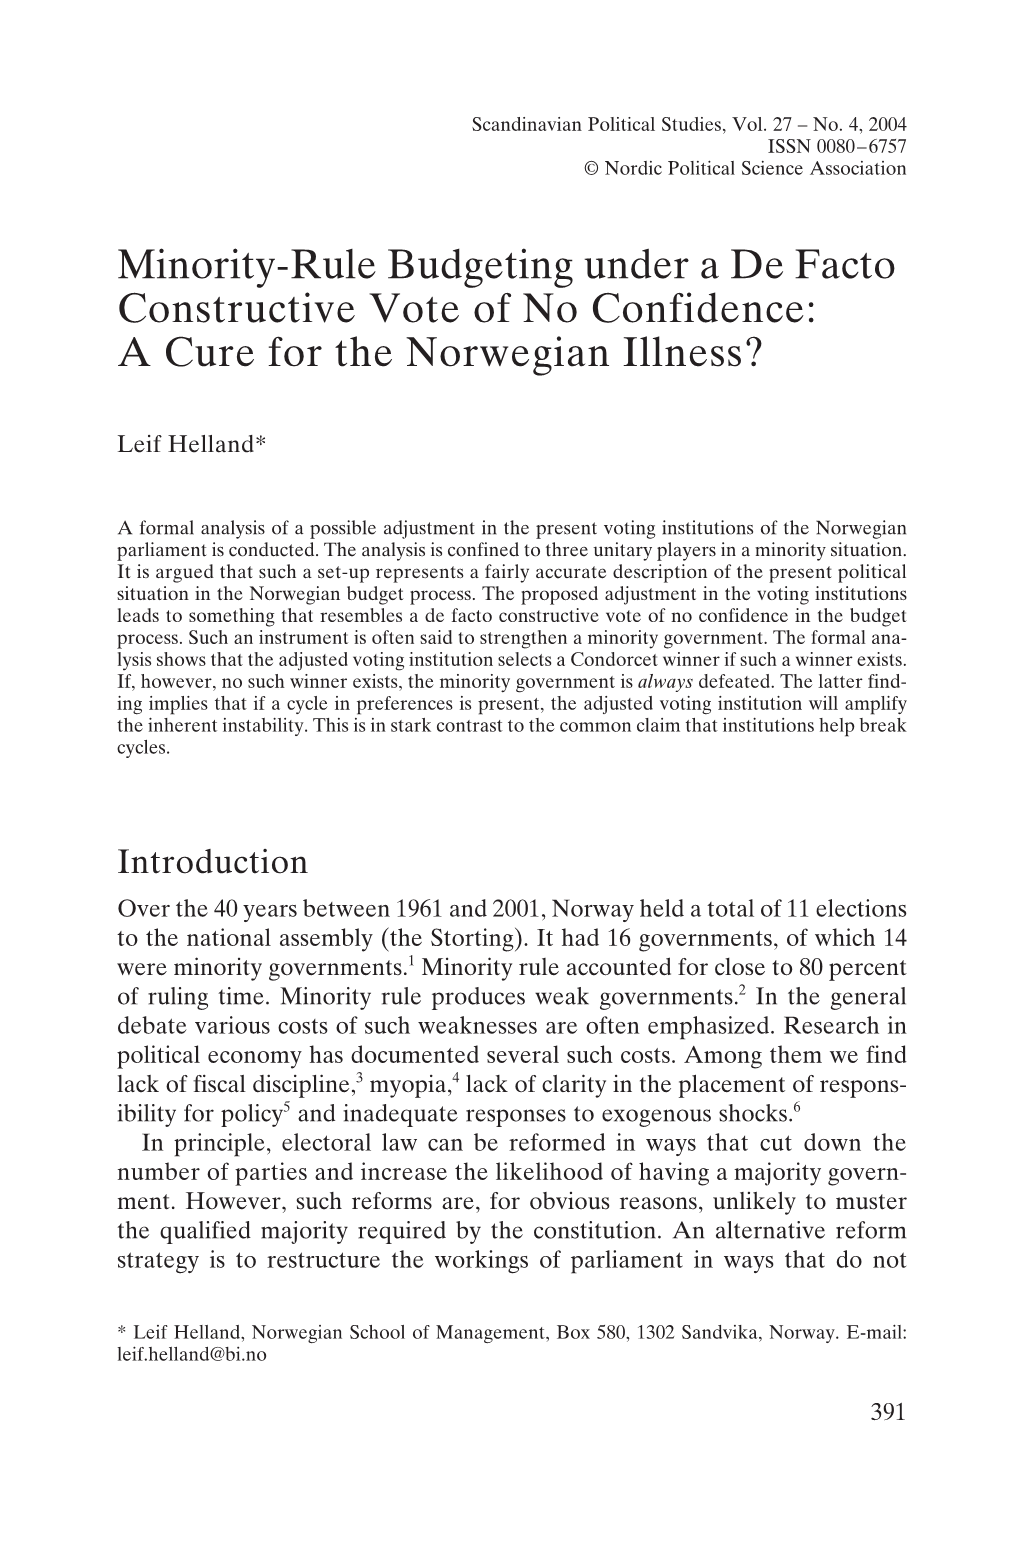 Minority-Rule Budgeting Under a De Facto Constructive Vote of No Confidence: a Cure for the Norwegian Illness?